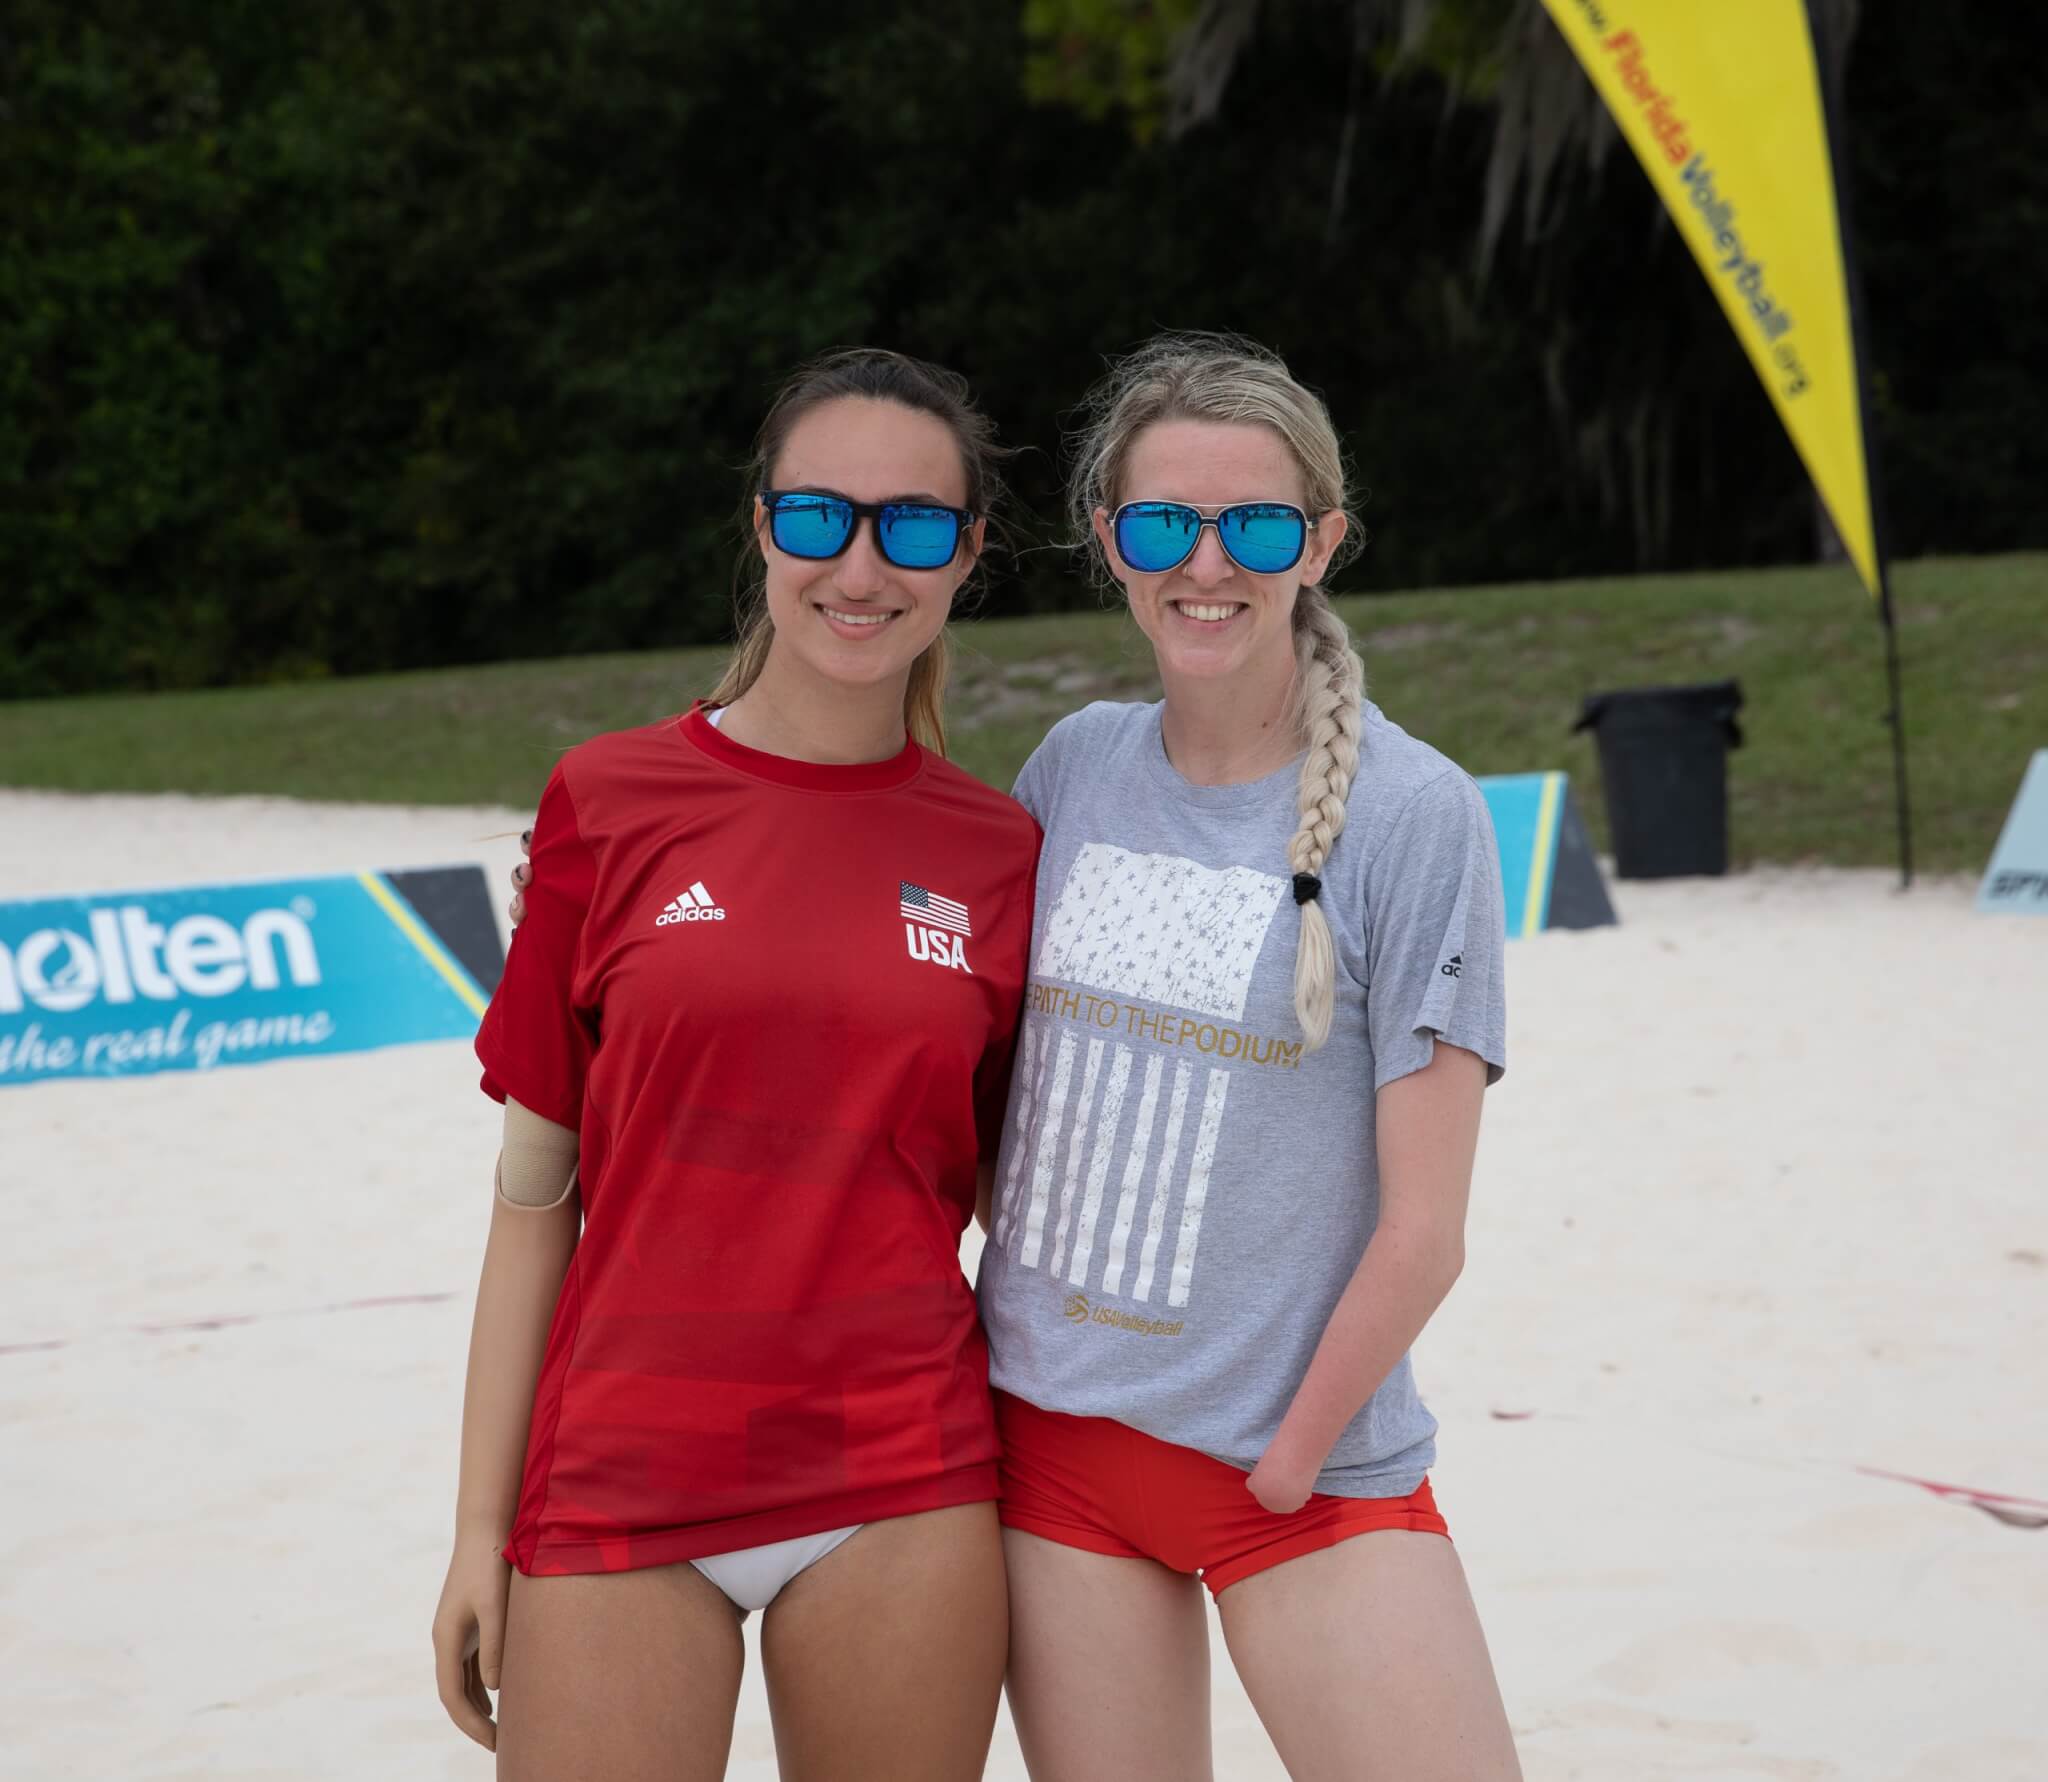 Two Team USA Beach ParaVolley athletes pose during the Florida Pro Best of the Beach event in November 2021